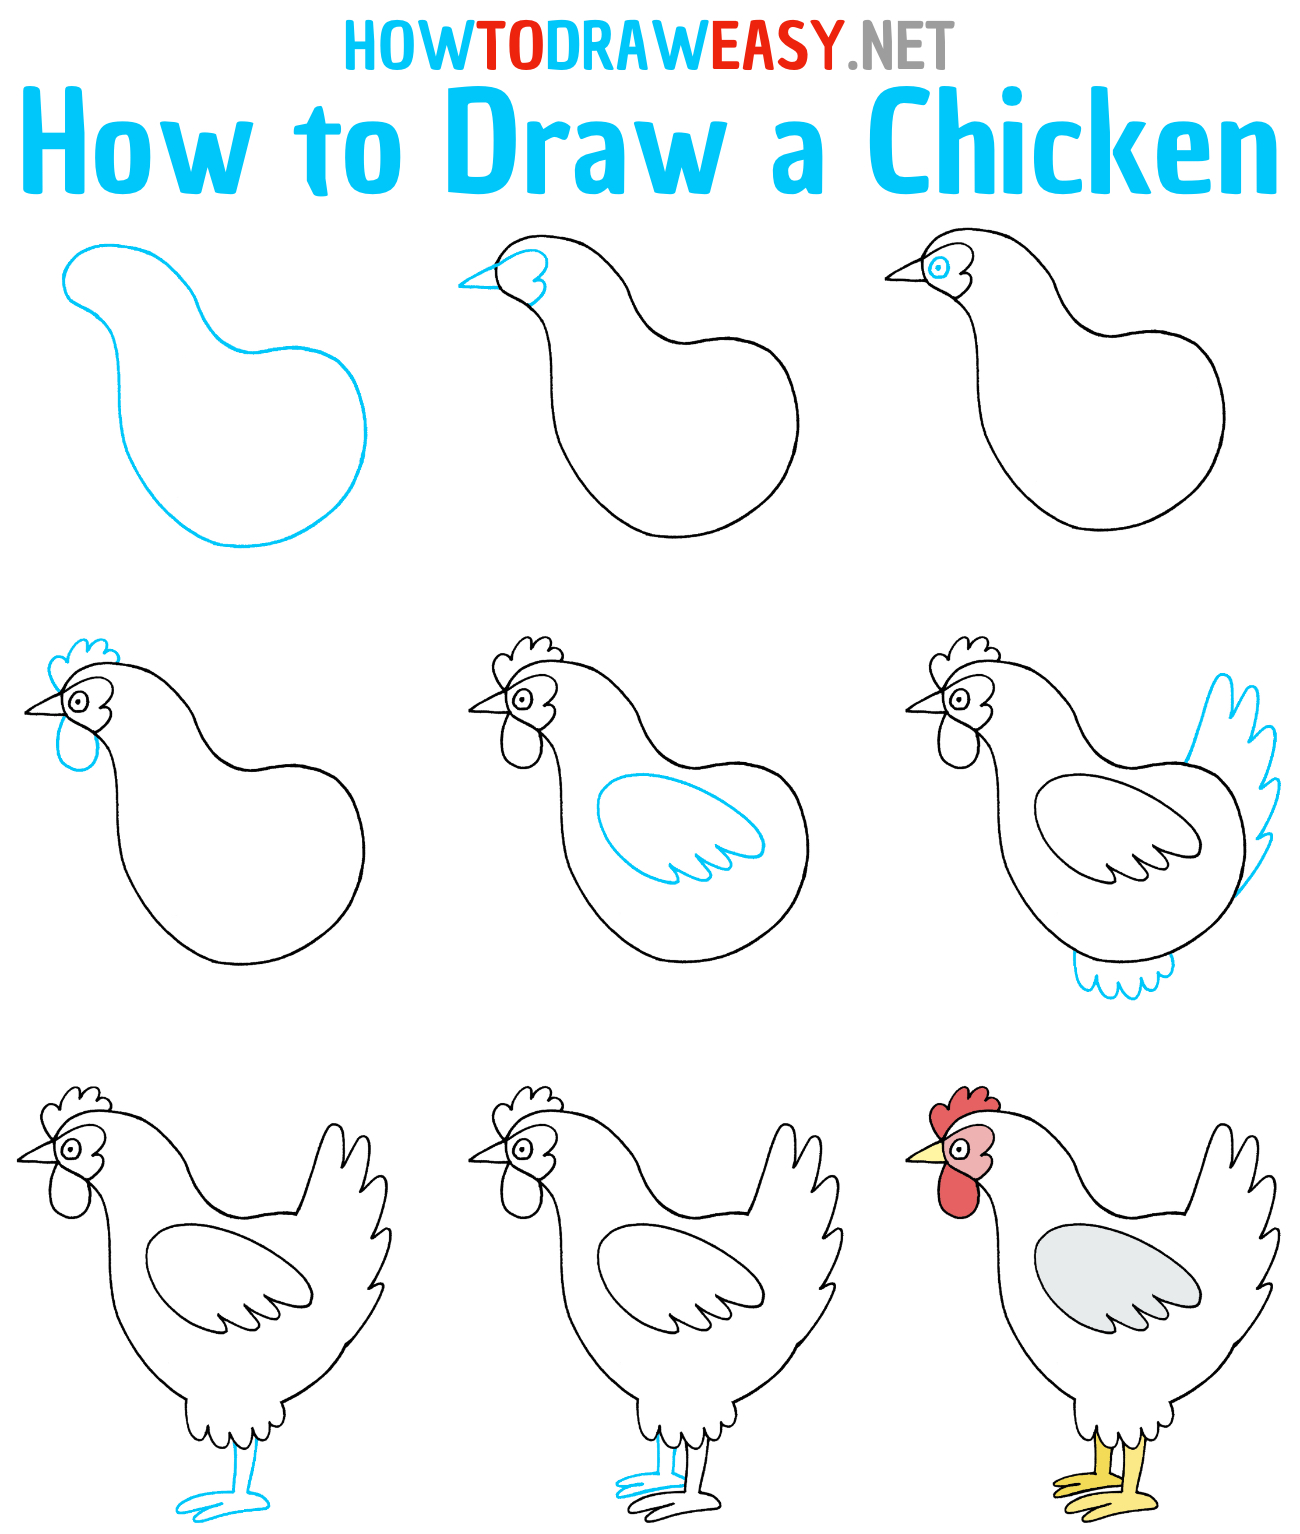 How to Draw a Chicken Step by Step